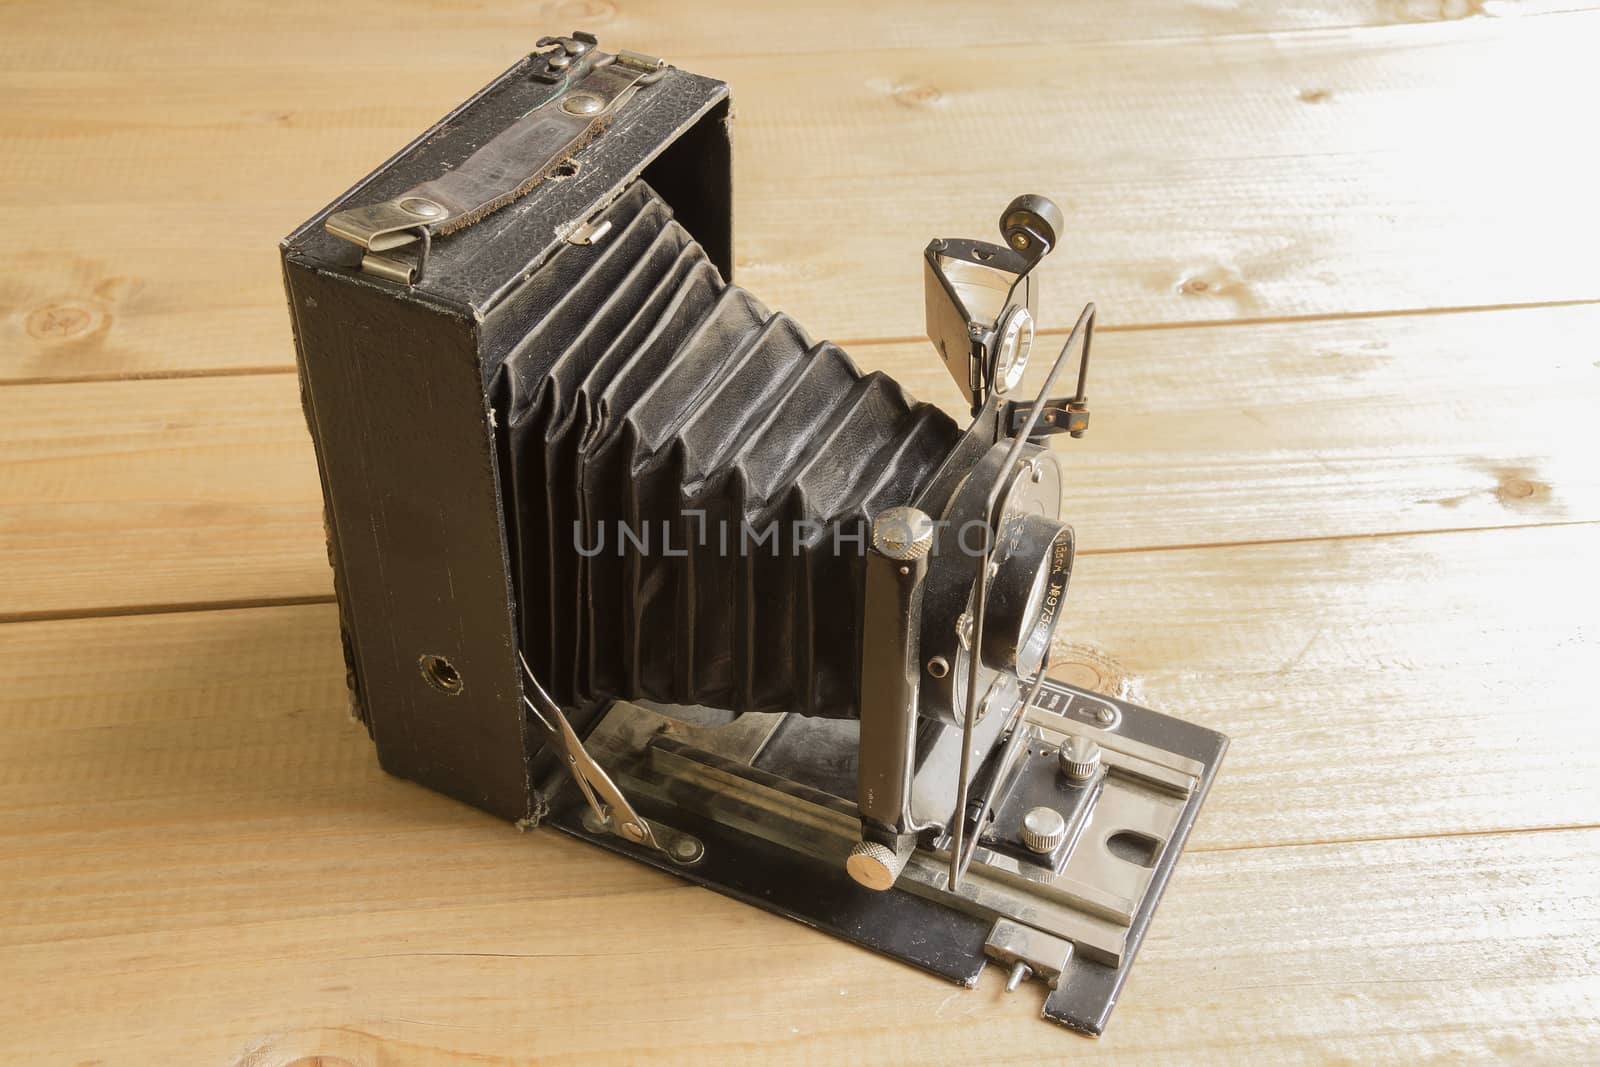 Vintage camera on the Brown wooden background